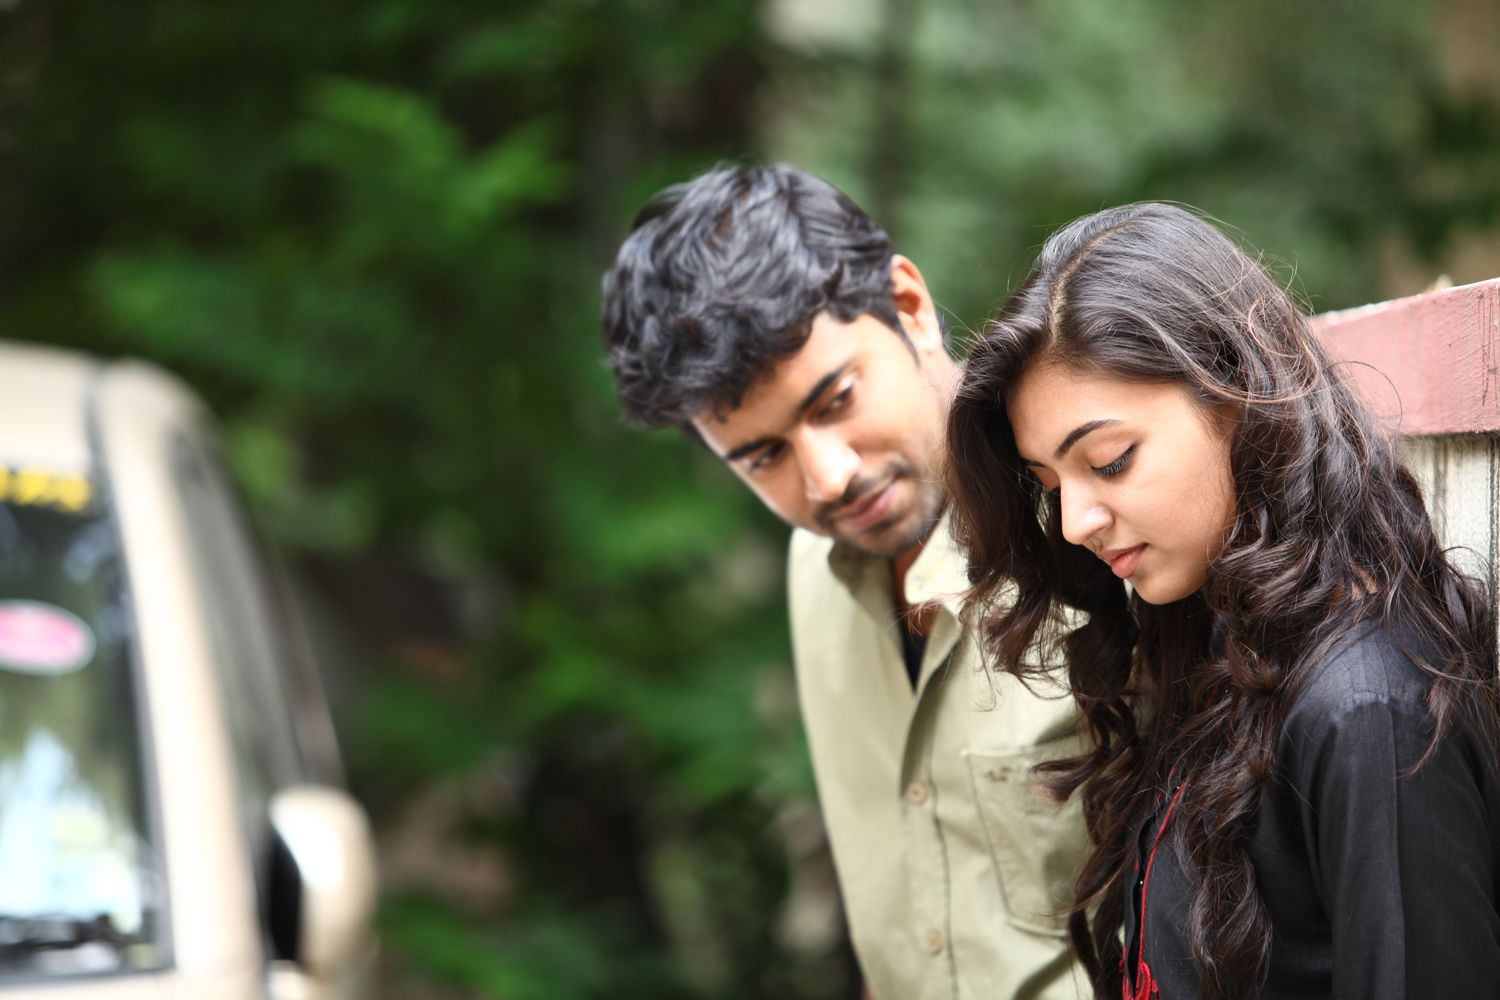 Best Of Neram Movie Image with Love Quotes. Love quotes collection within HD image